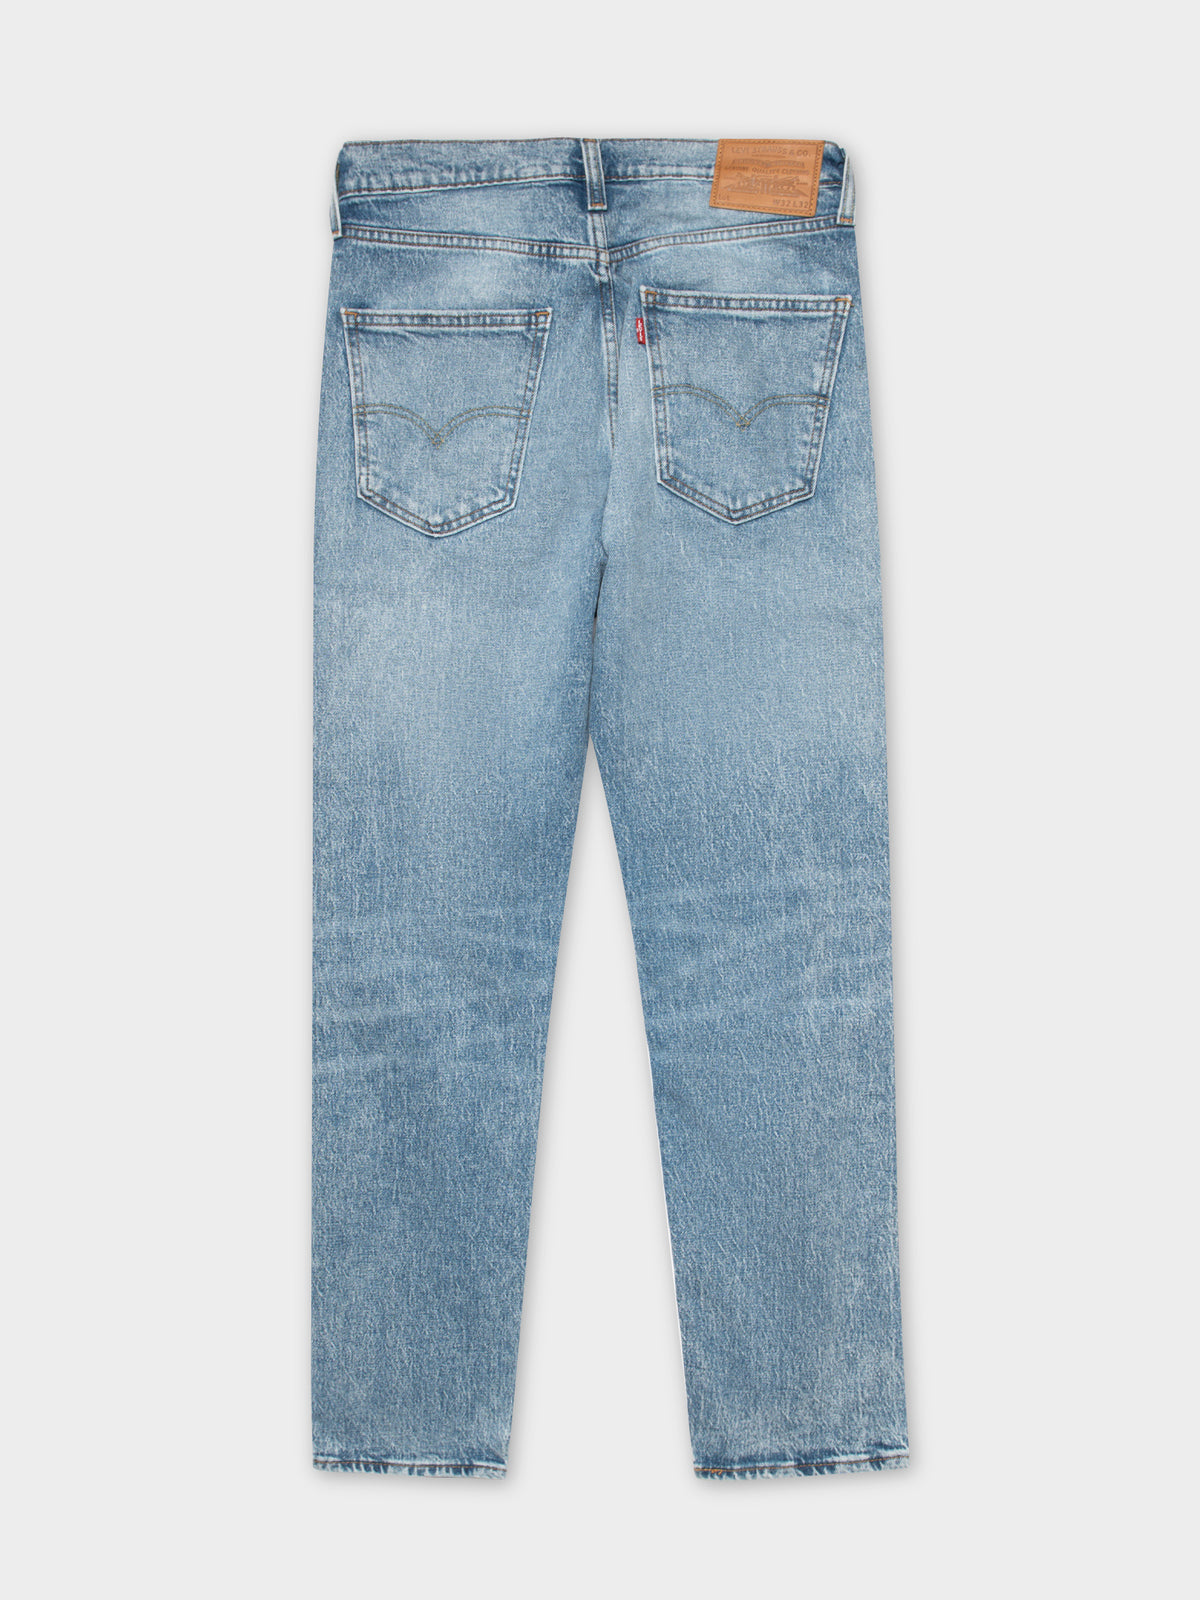 So High Slim Fit Jeans in California Star DX